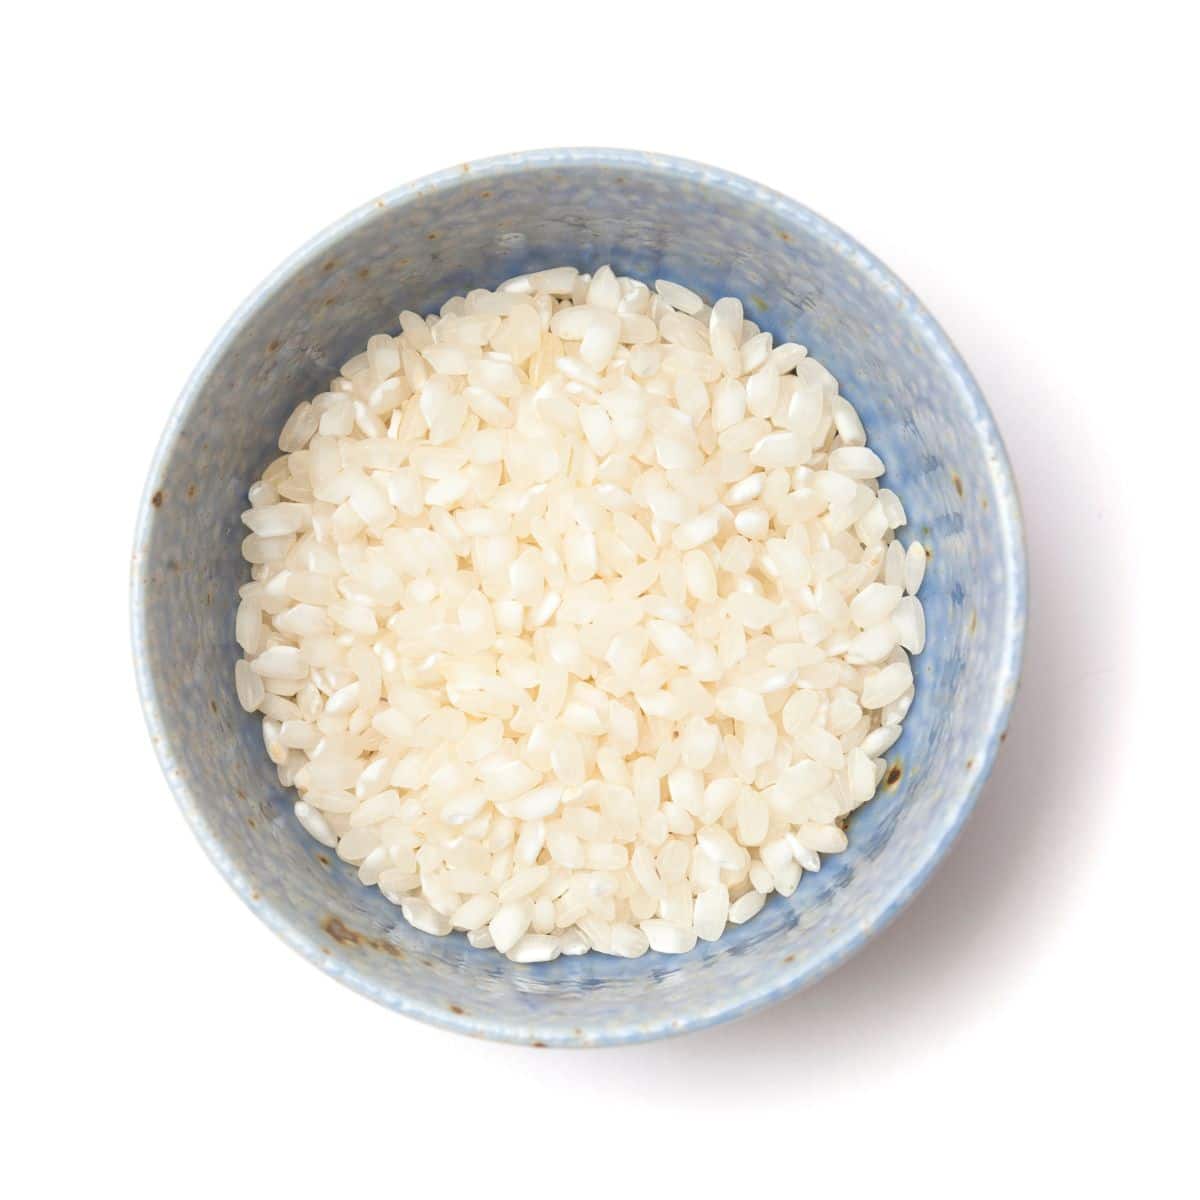 Bomba rice in a bowl on a white background.